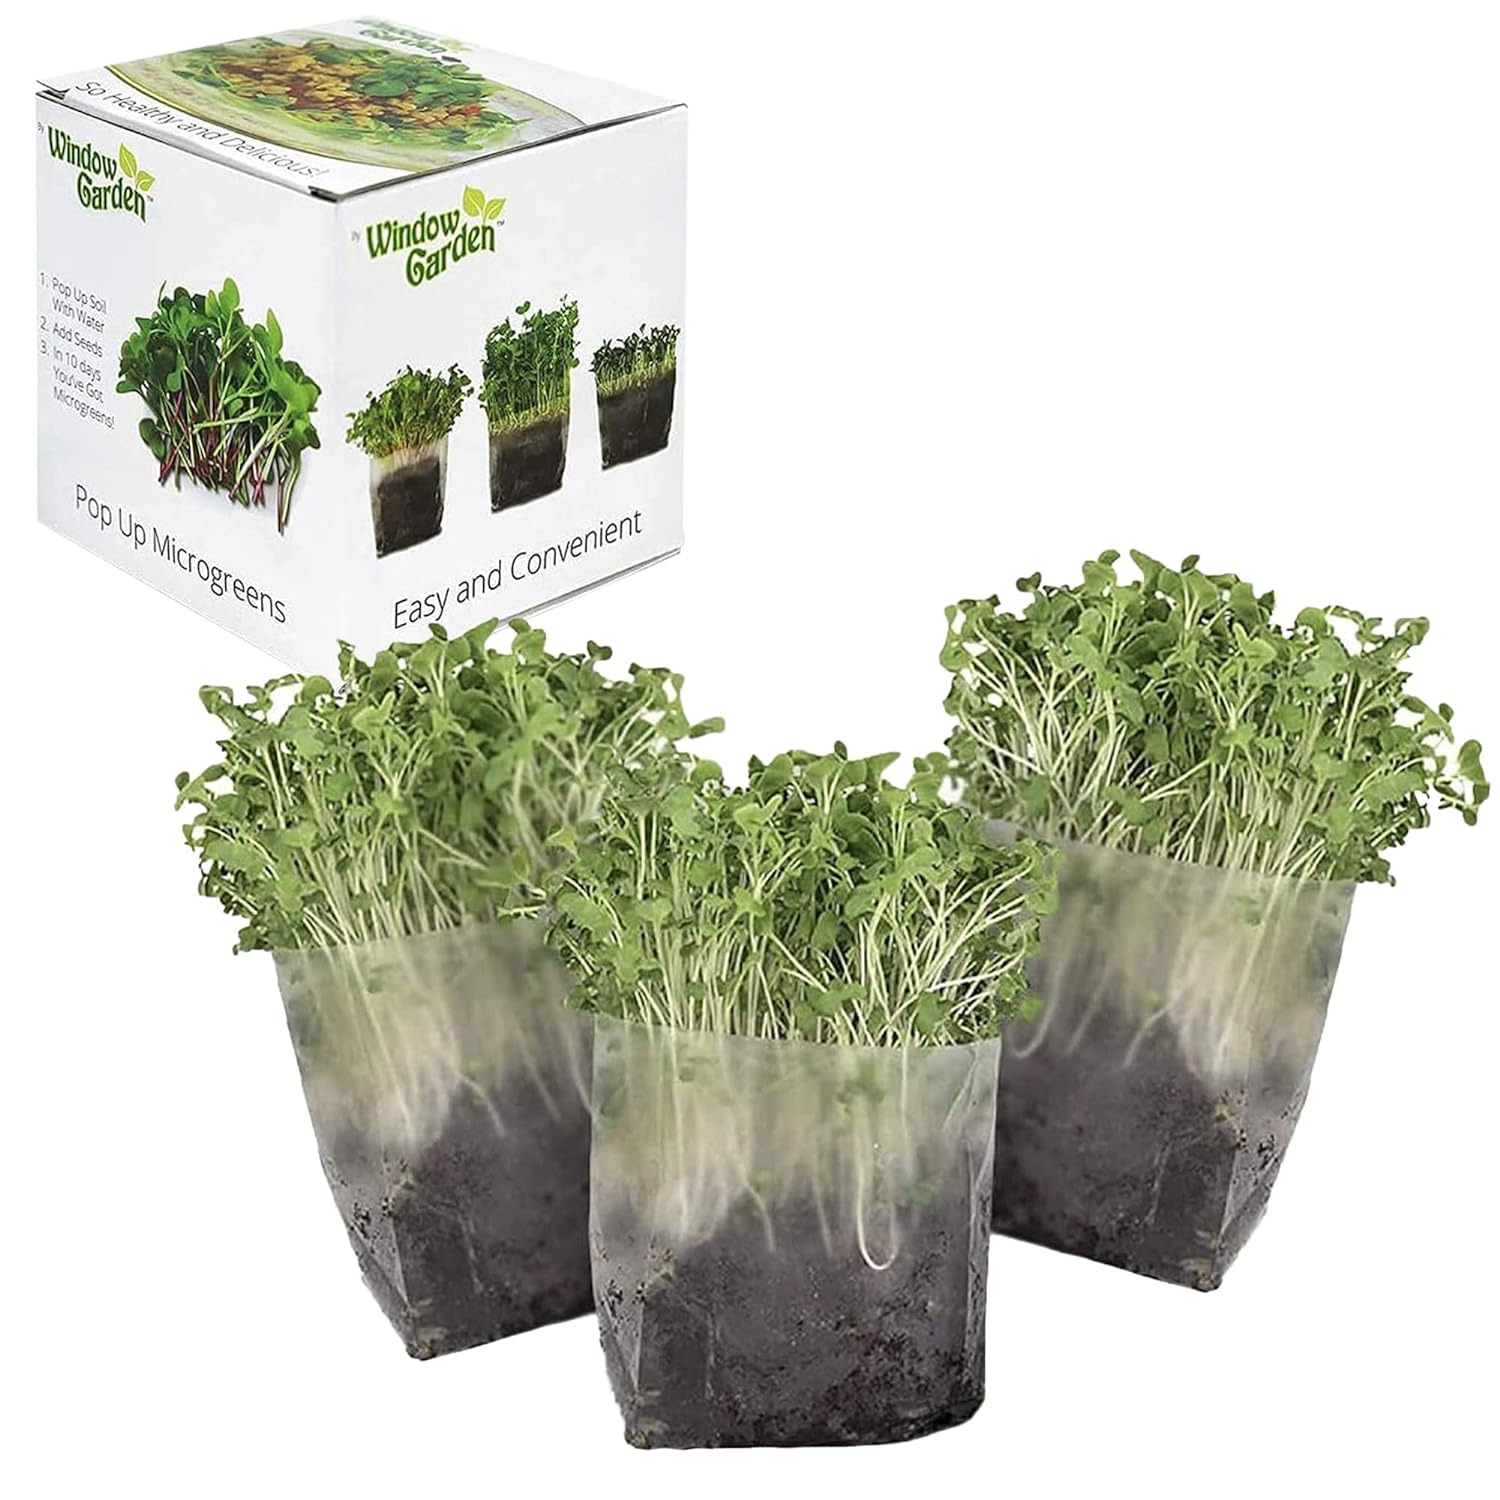 Pop up Microgreens Kit (Kale) – Just Add Water and Seed. Perfect Size, a Quick, 